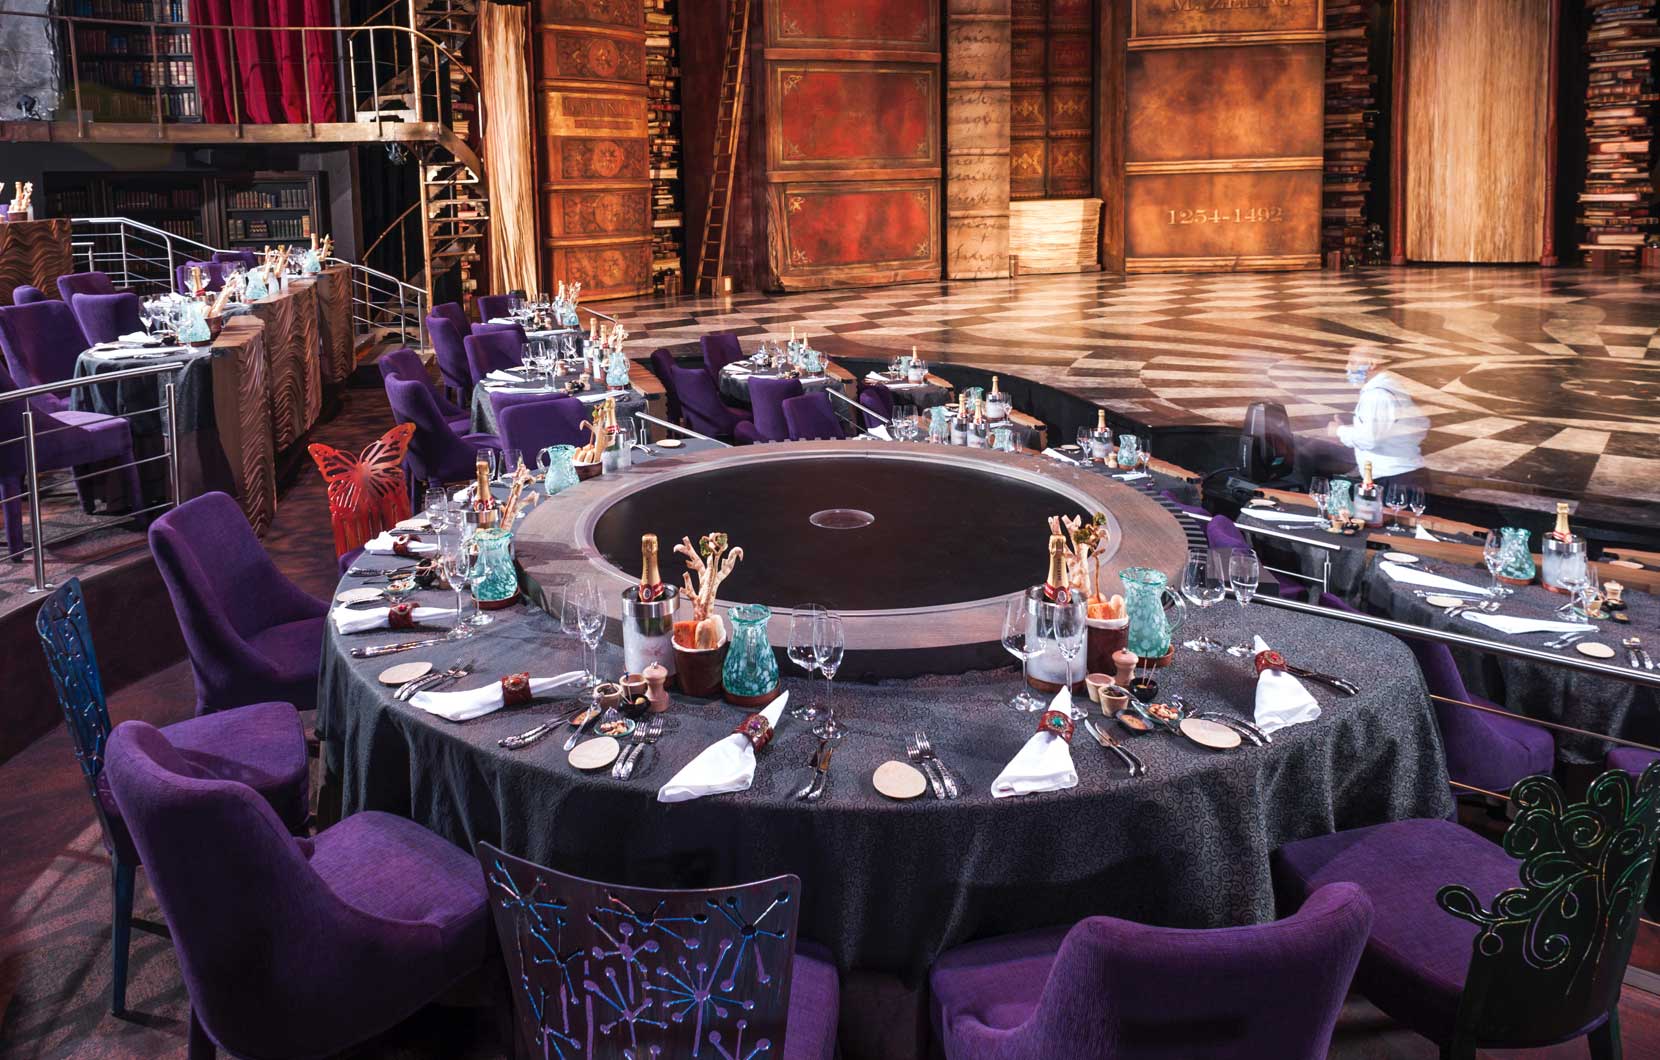 The JOYÀ Dinner Experience is the perfect mirror to the show's themes of magic, discovery, and history.